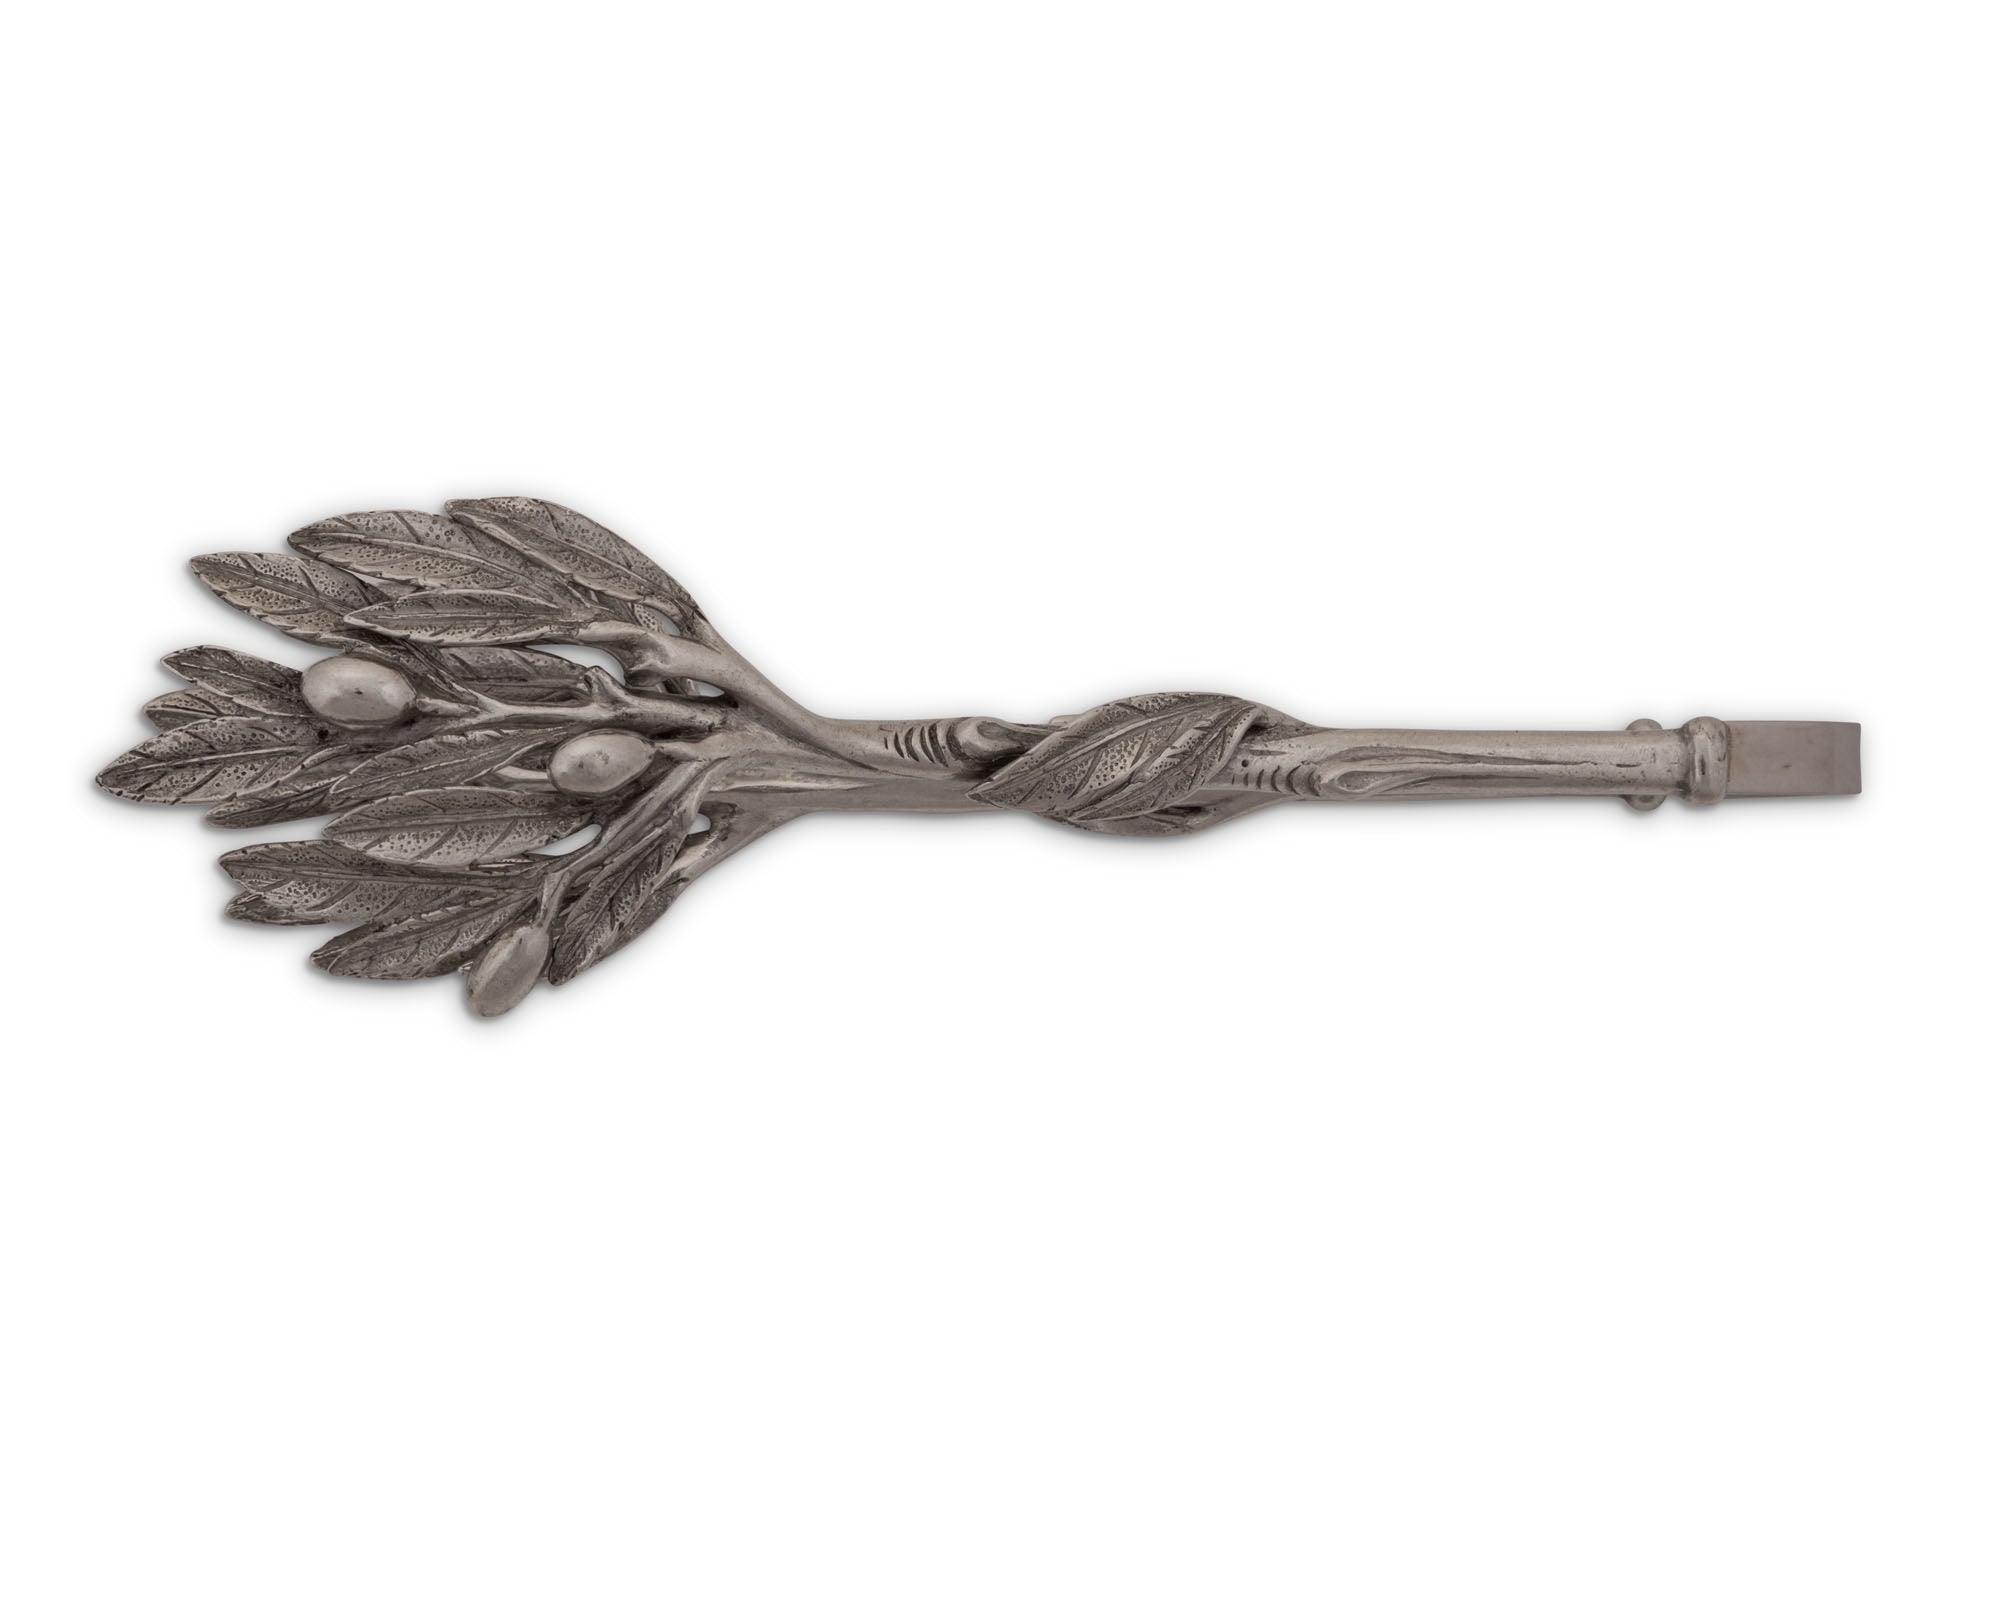 Vagabond House Pewter Olive Pattern Ice / Bread Tongs Product Image